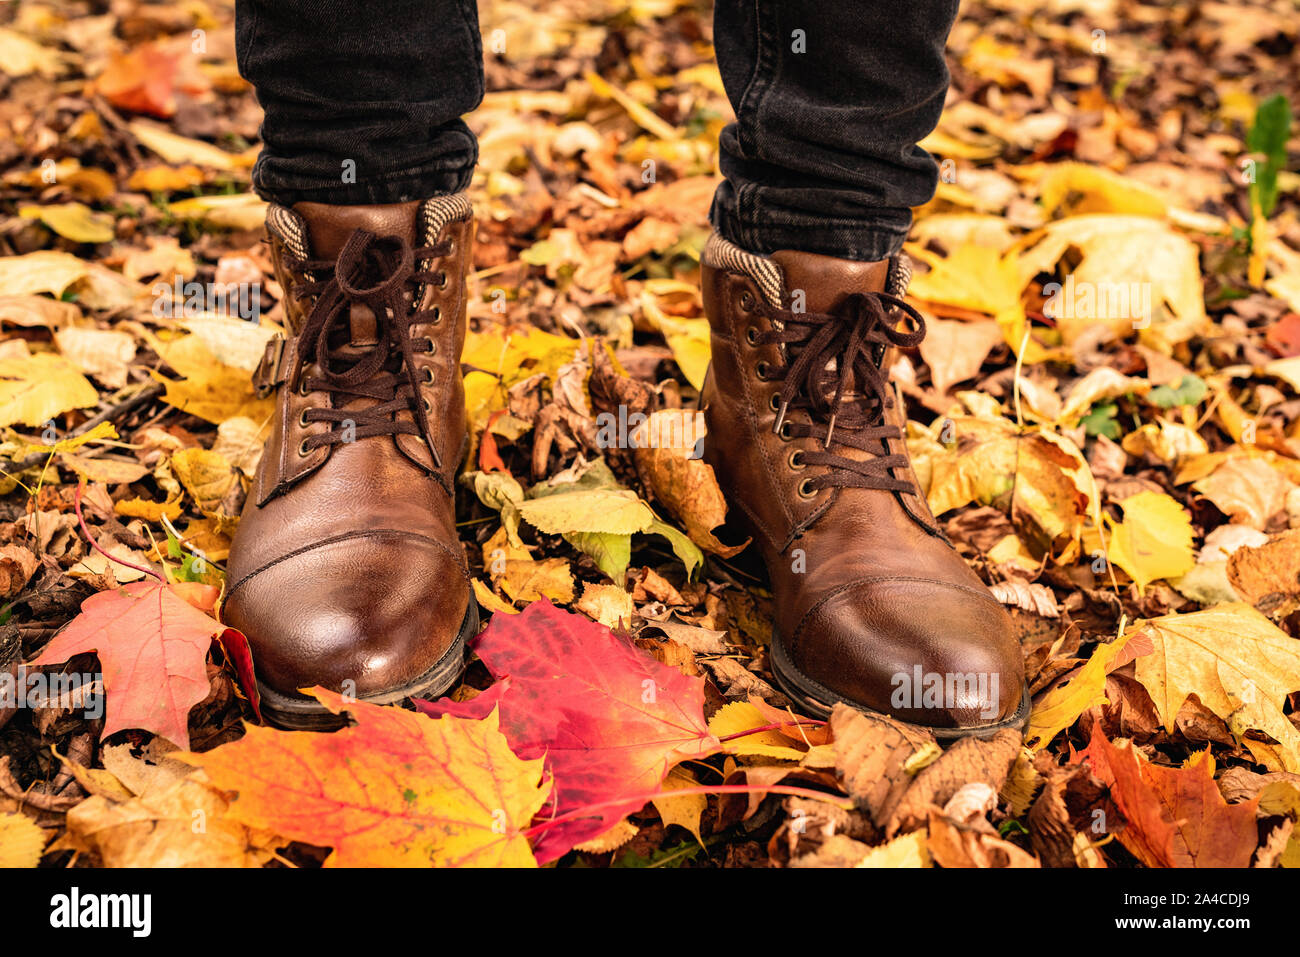 Male legs in brown leather boots standing on foliage in autumnal park. Fall season. Colorful maple leaves, lifestyle concept Stock Photo